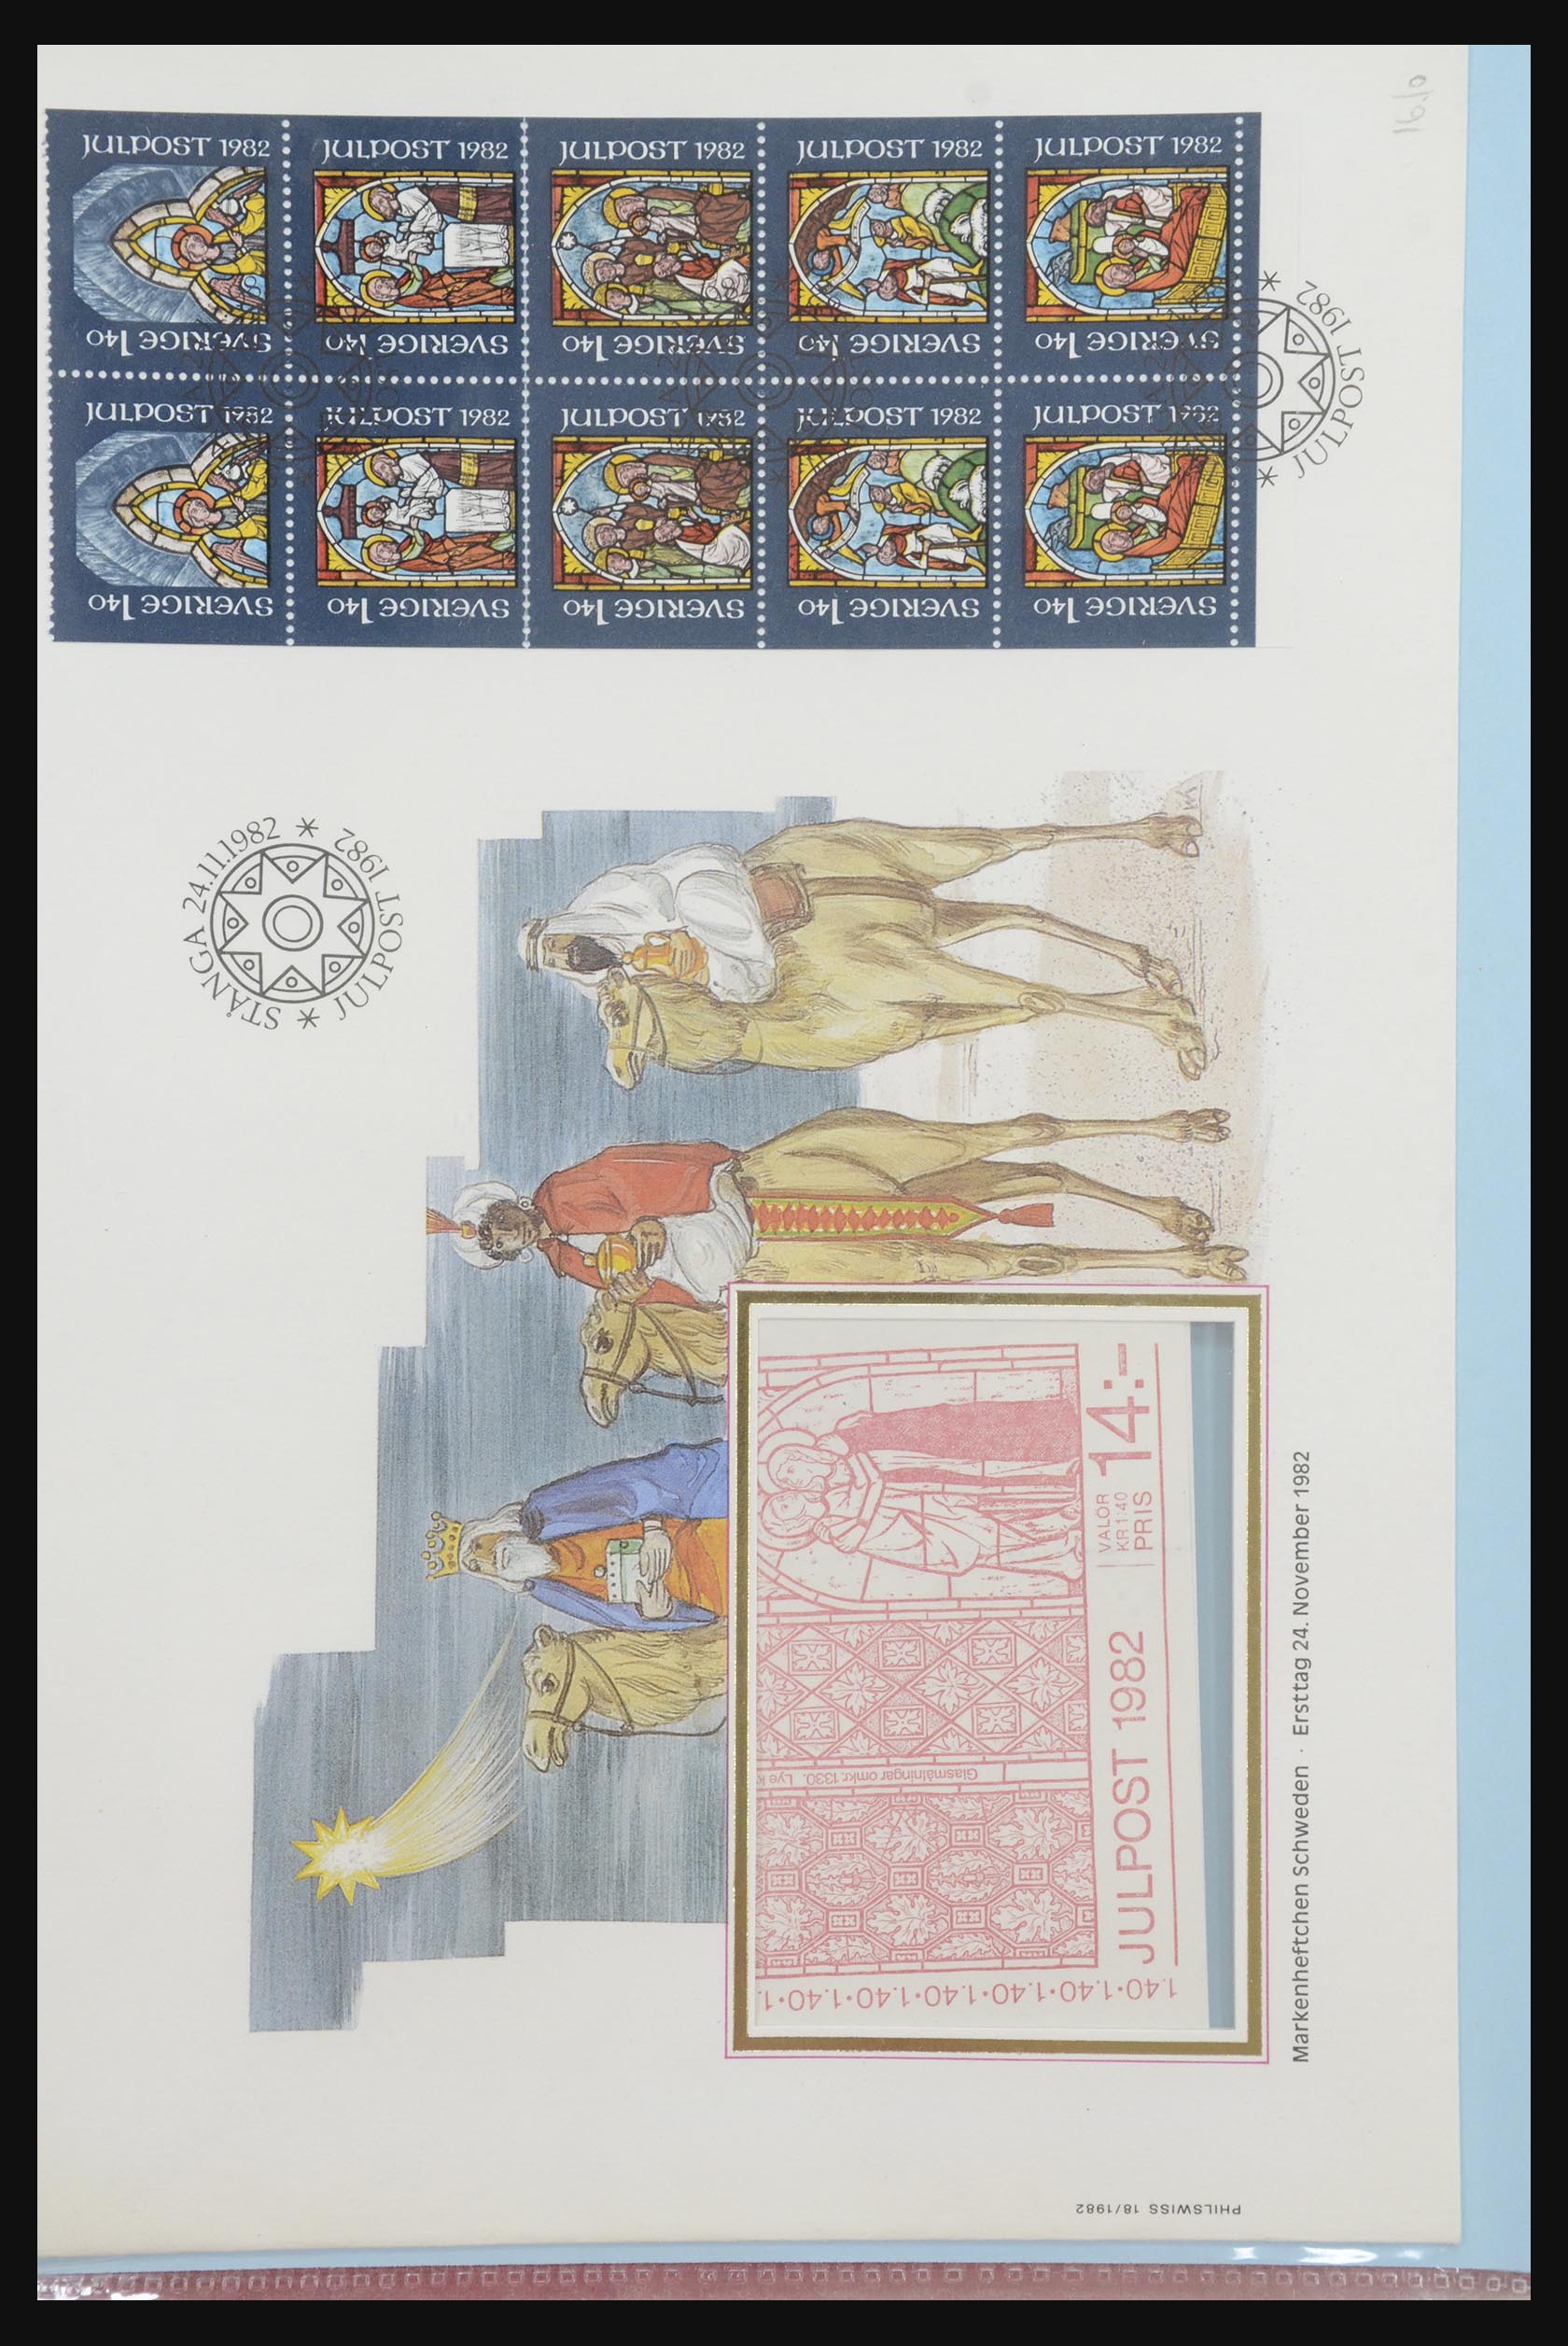 31915 386 - 31915 Western Europe souvenir sheets and stamp booklets on FDC.